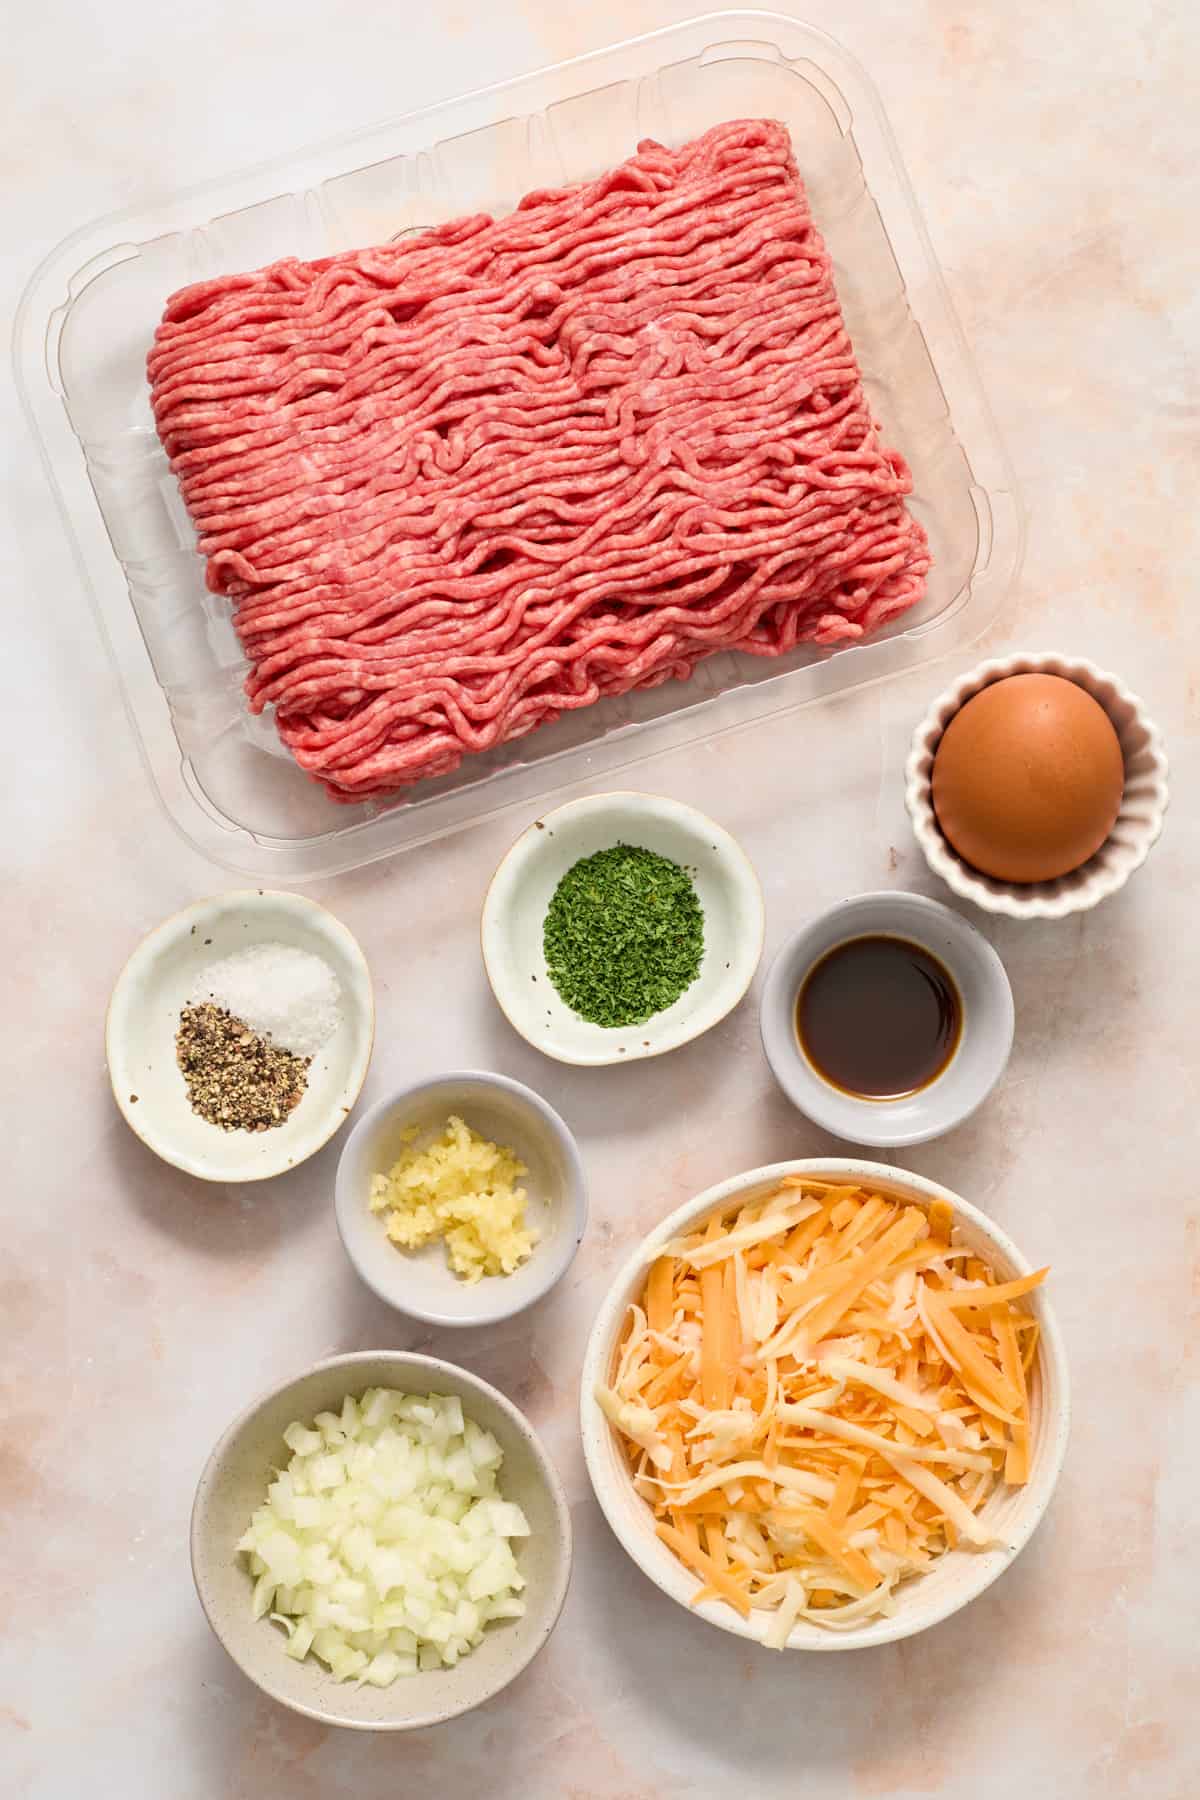 Beef, seasoning, egg, cheese, onion and other ingredients prepped for recipe.